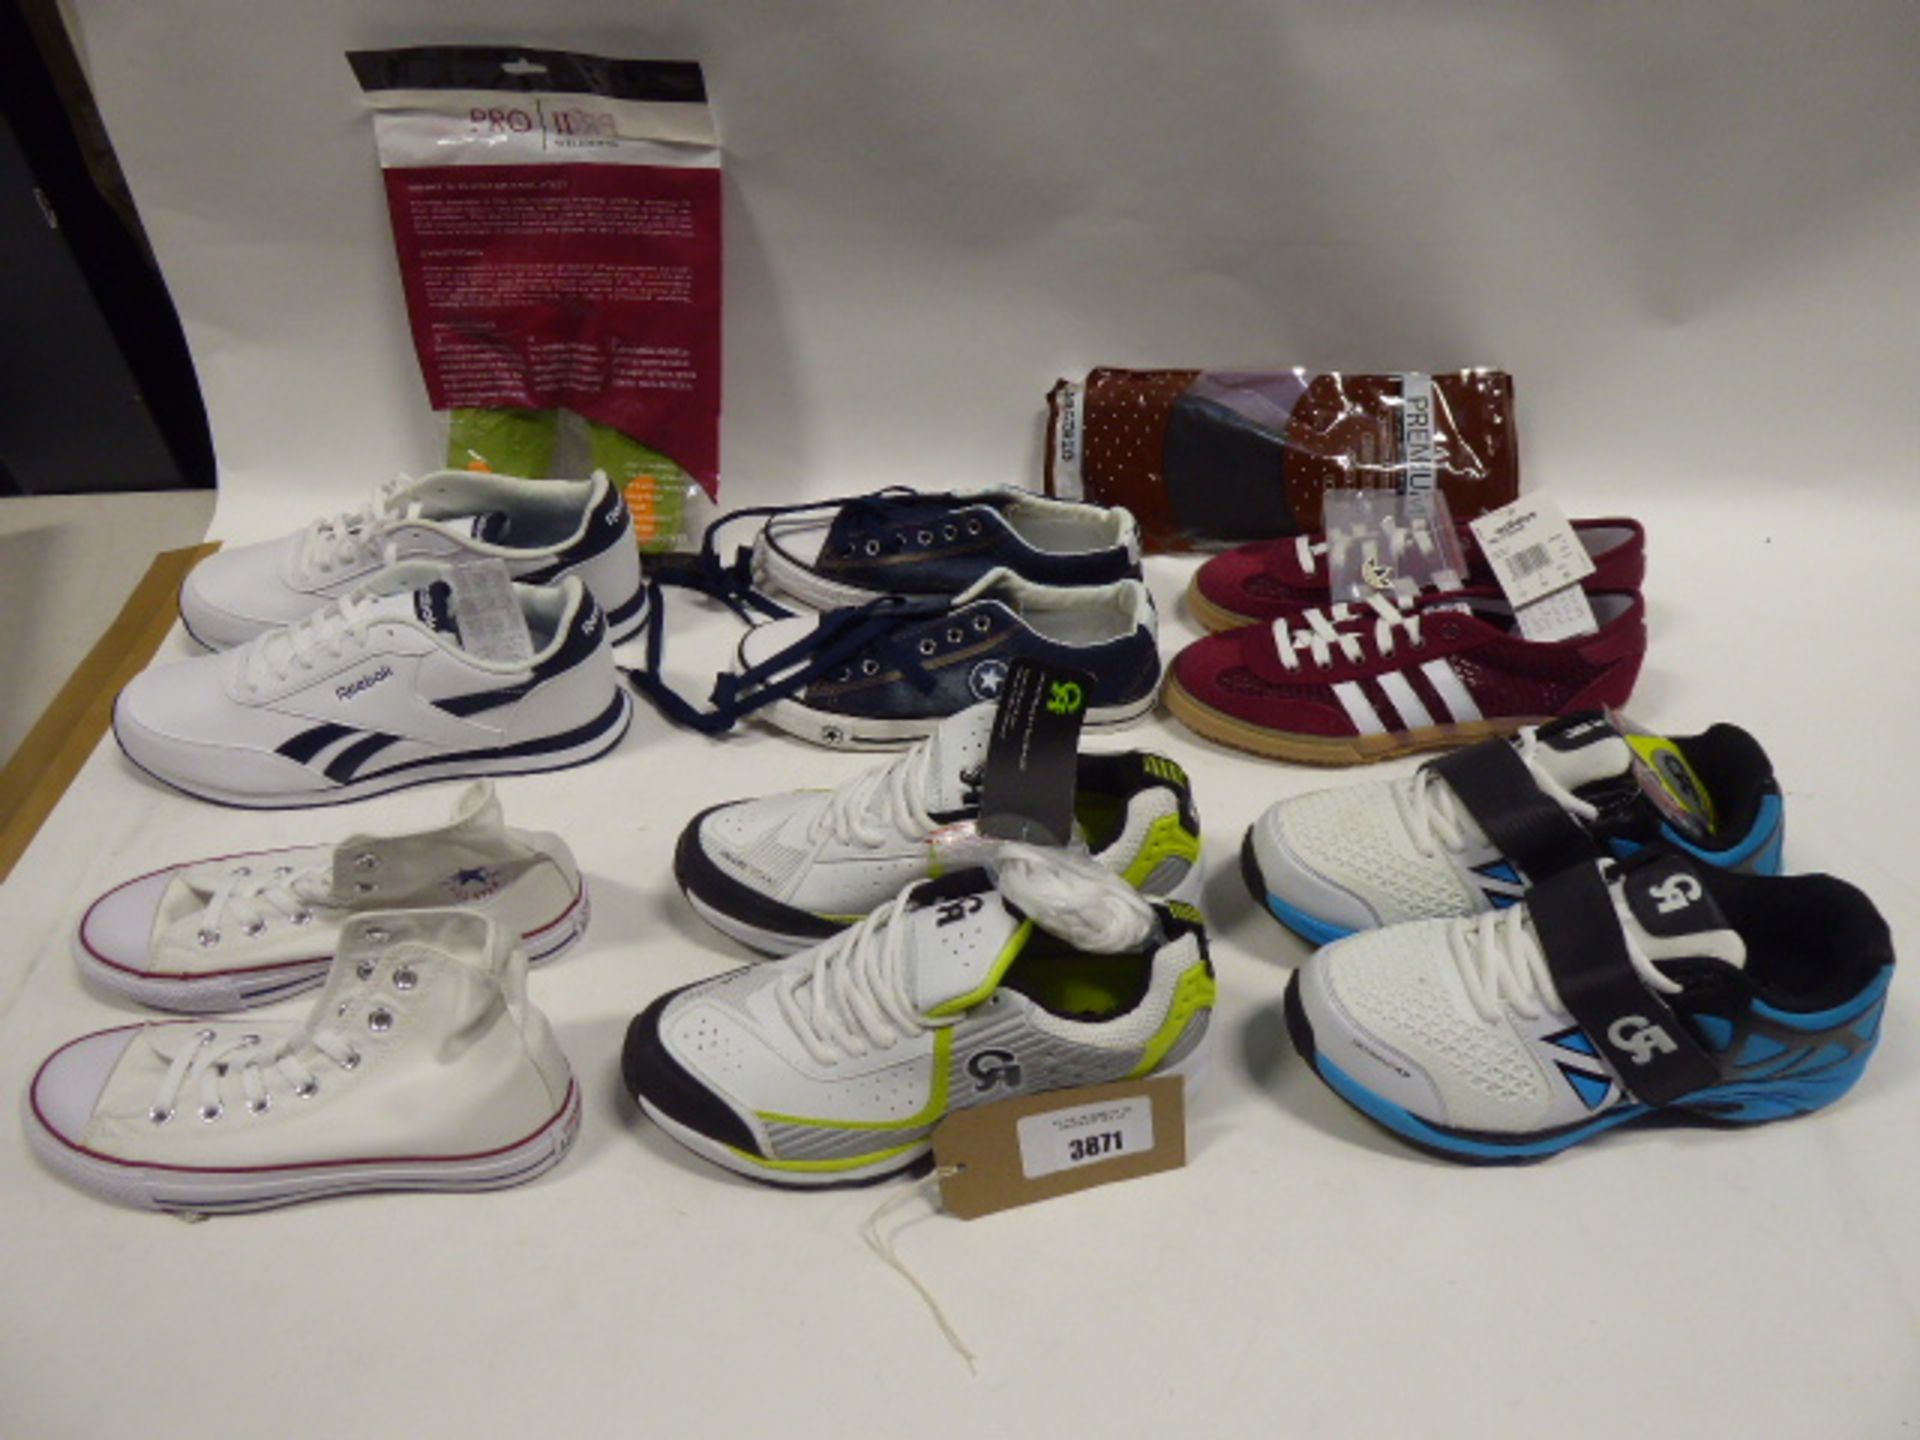 Bag containing assorted trainers and footwear accessories